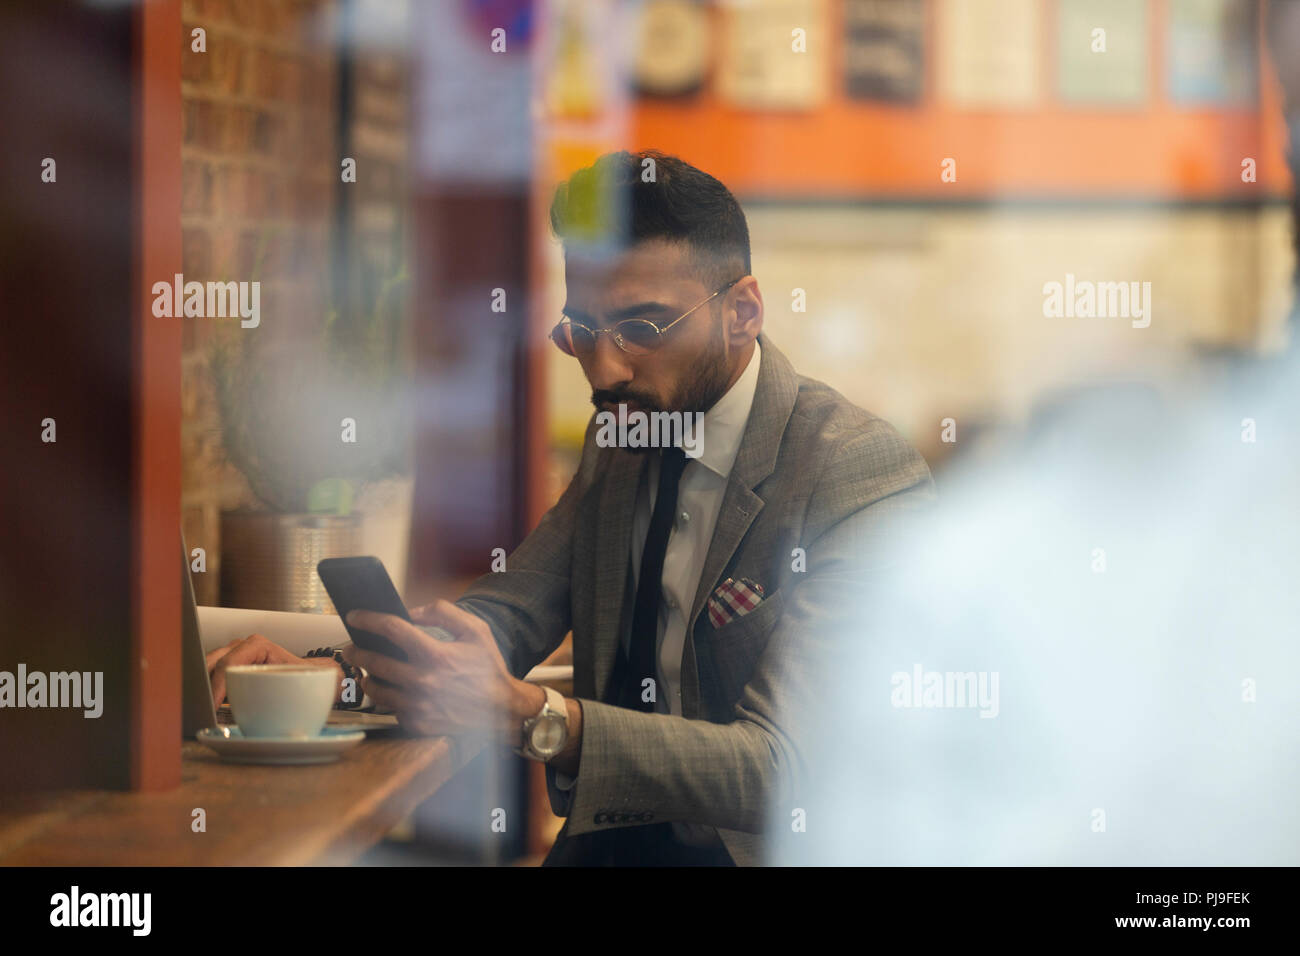 Businessman using smart phone, working in cafe Stock Photo